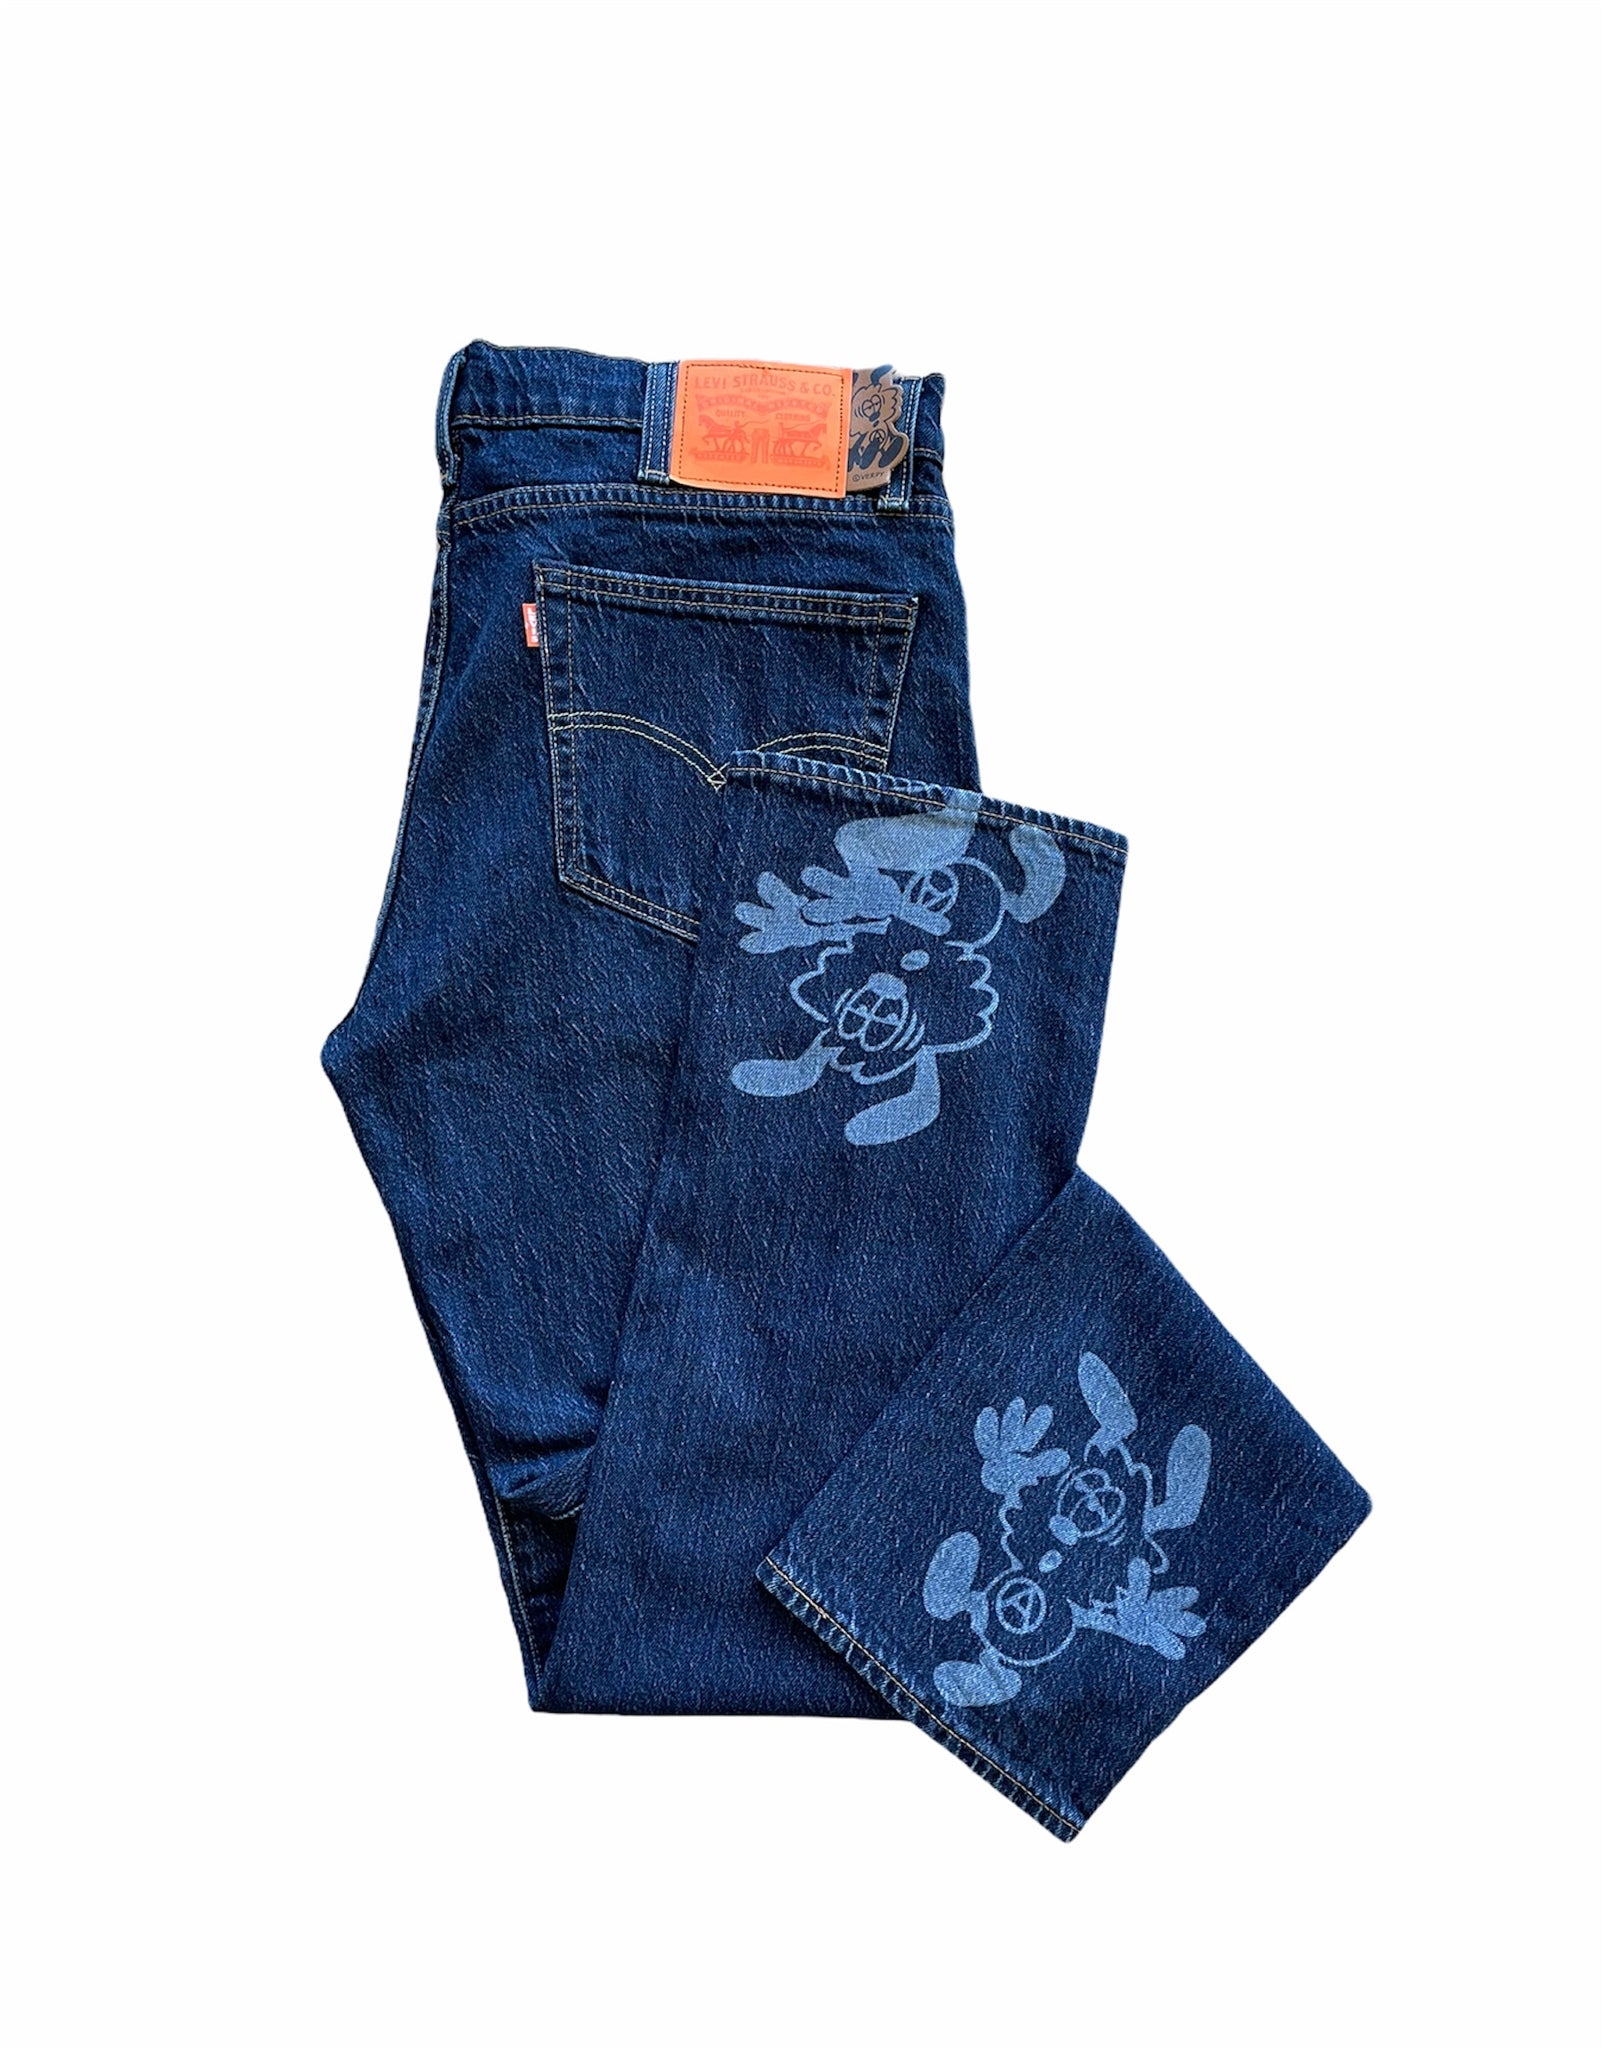 Verdy x Levis Jeans – from away store